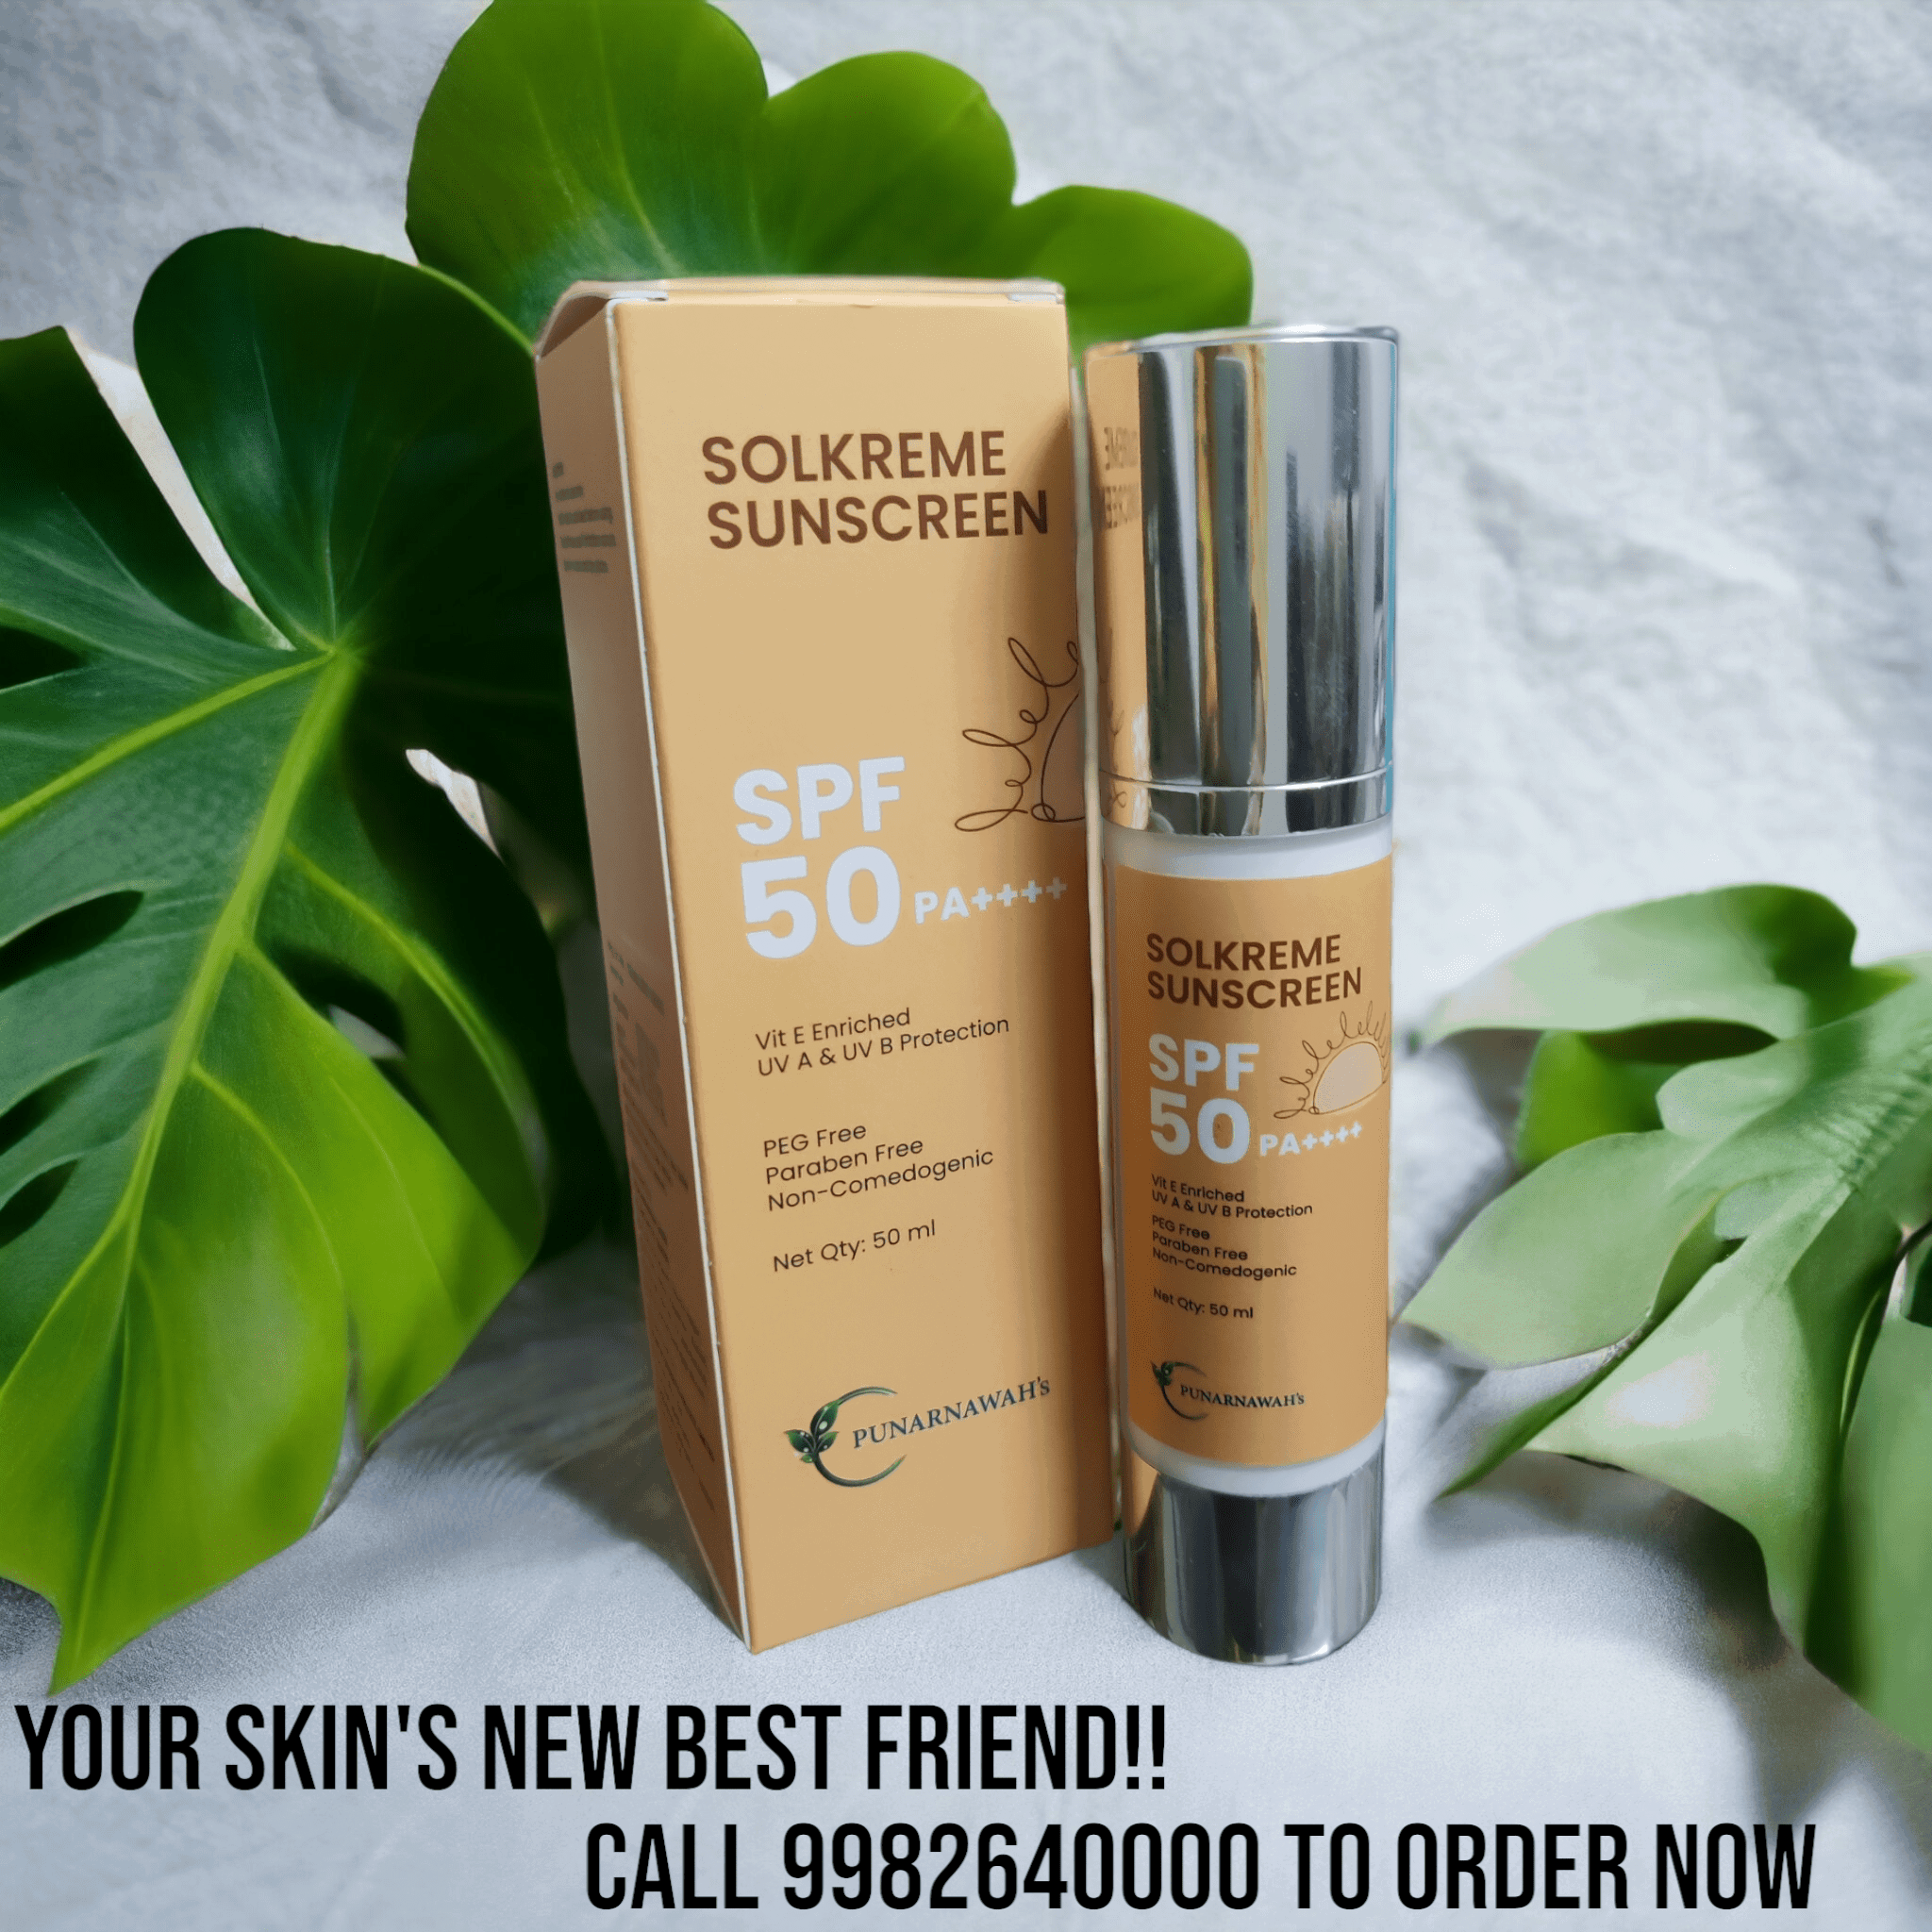 Sunshield Sophistication: Punarnawah Solkreme Sunscreen - Protect Your Skin with Style.